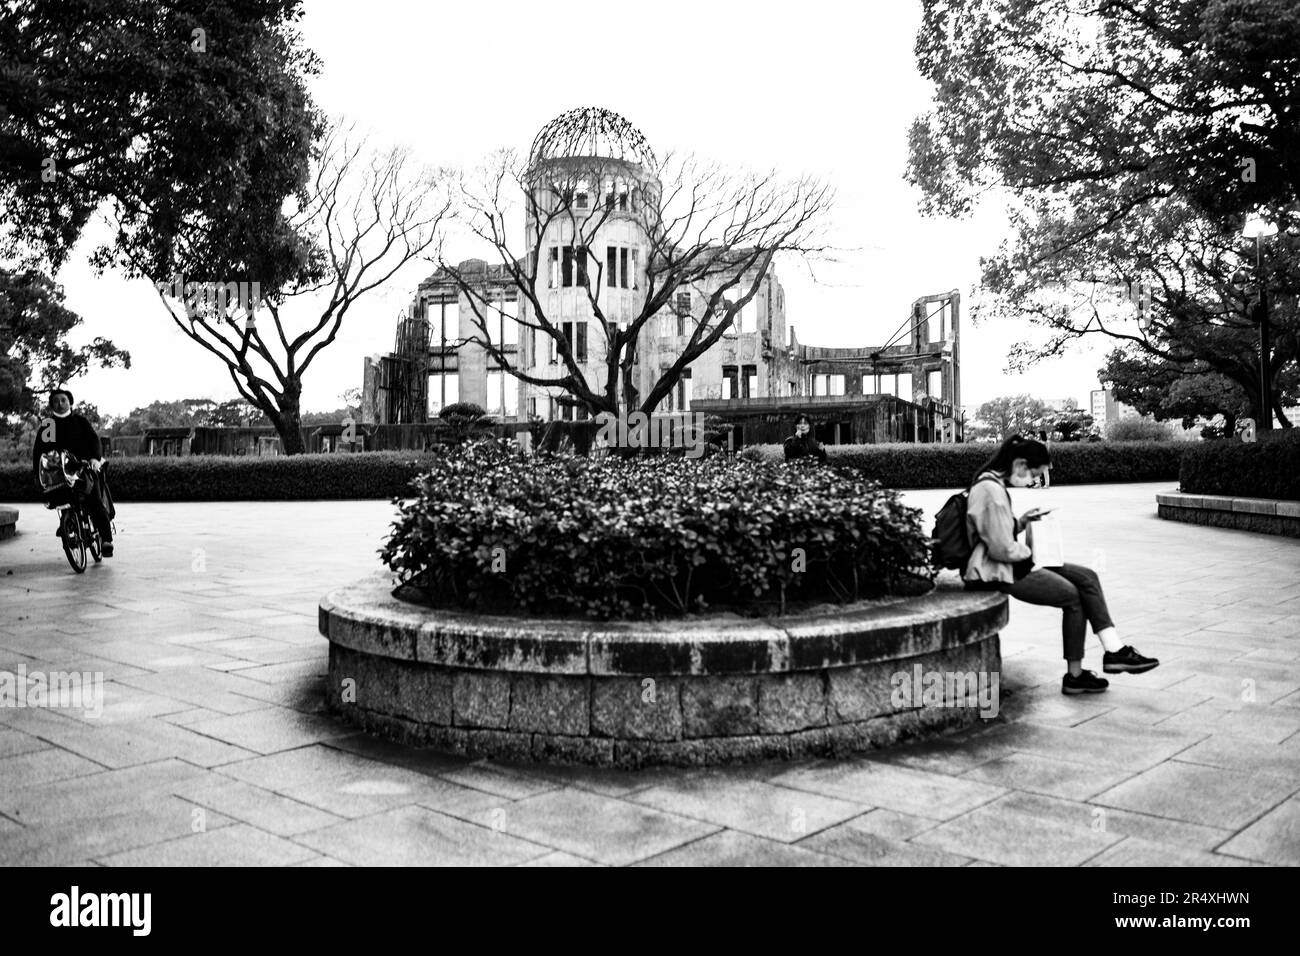 Hiroshima, Japan. 7th Mar, 2023. The Atomic Bomb Dome.The Atomic Bomb Dome, known as Genbaku Dome (åŽŸçˆ†ãƒ‰ãƒ¼ãƒ ) in Japanese, stands as a poignant reminder of the devastating atomic bombing of Hiroshima in 1945 by the U.S. Army Air Forces Enola Gay B-29 bomber. This UNESCO World Heritage site serves as a symbol of peace and a testament to the importance of nuclear disarmament.Hiroshima (åºƒå³¶) is a significant city in western Japan, known for its tragic history and remarkable resilience. It is a symbol of peace and reconciliation, with monuments like the Peace Memorial Park and Hiroshi Stock Photo